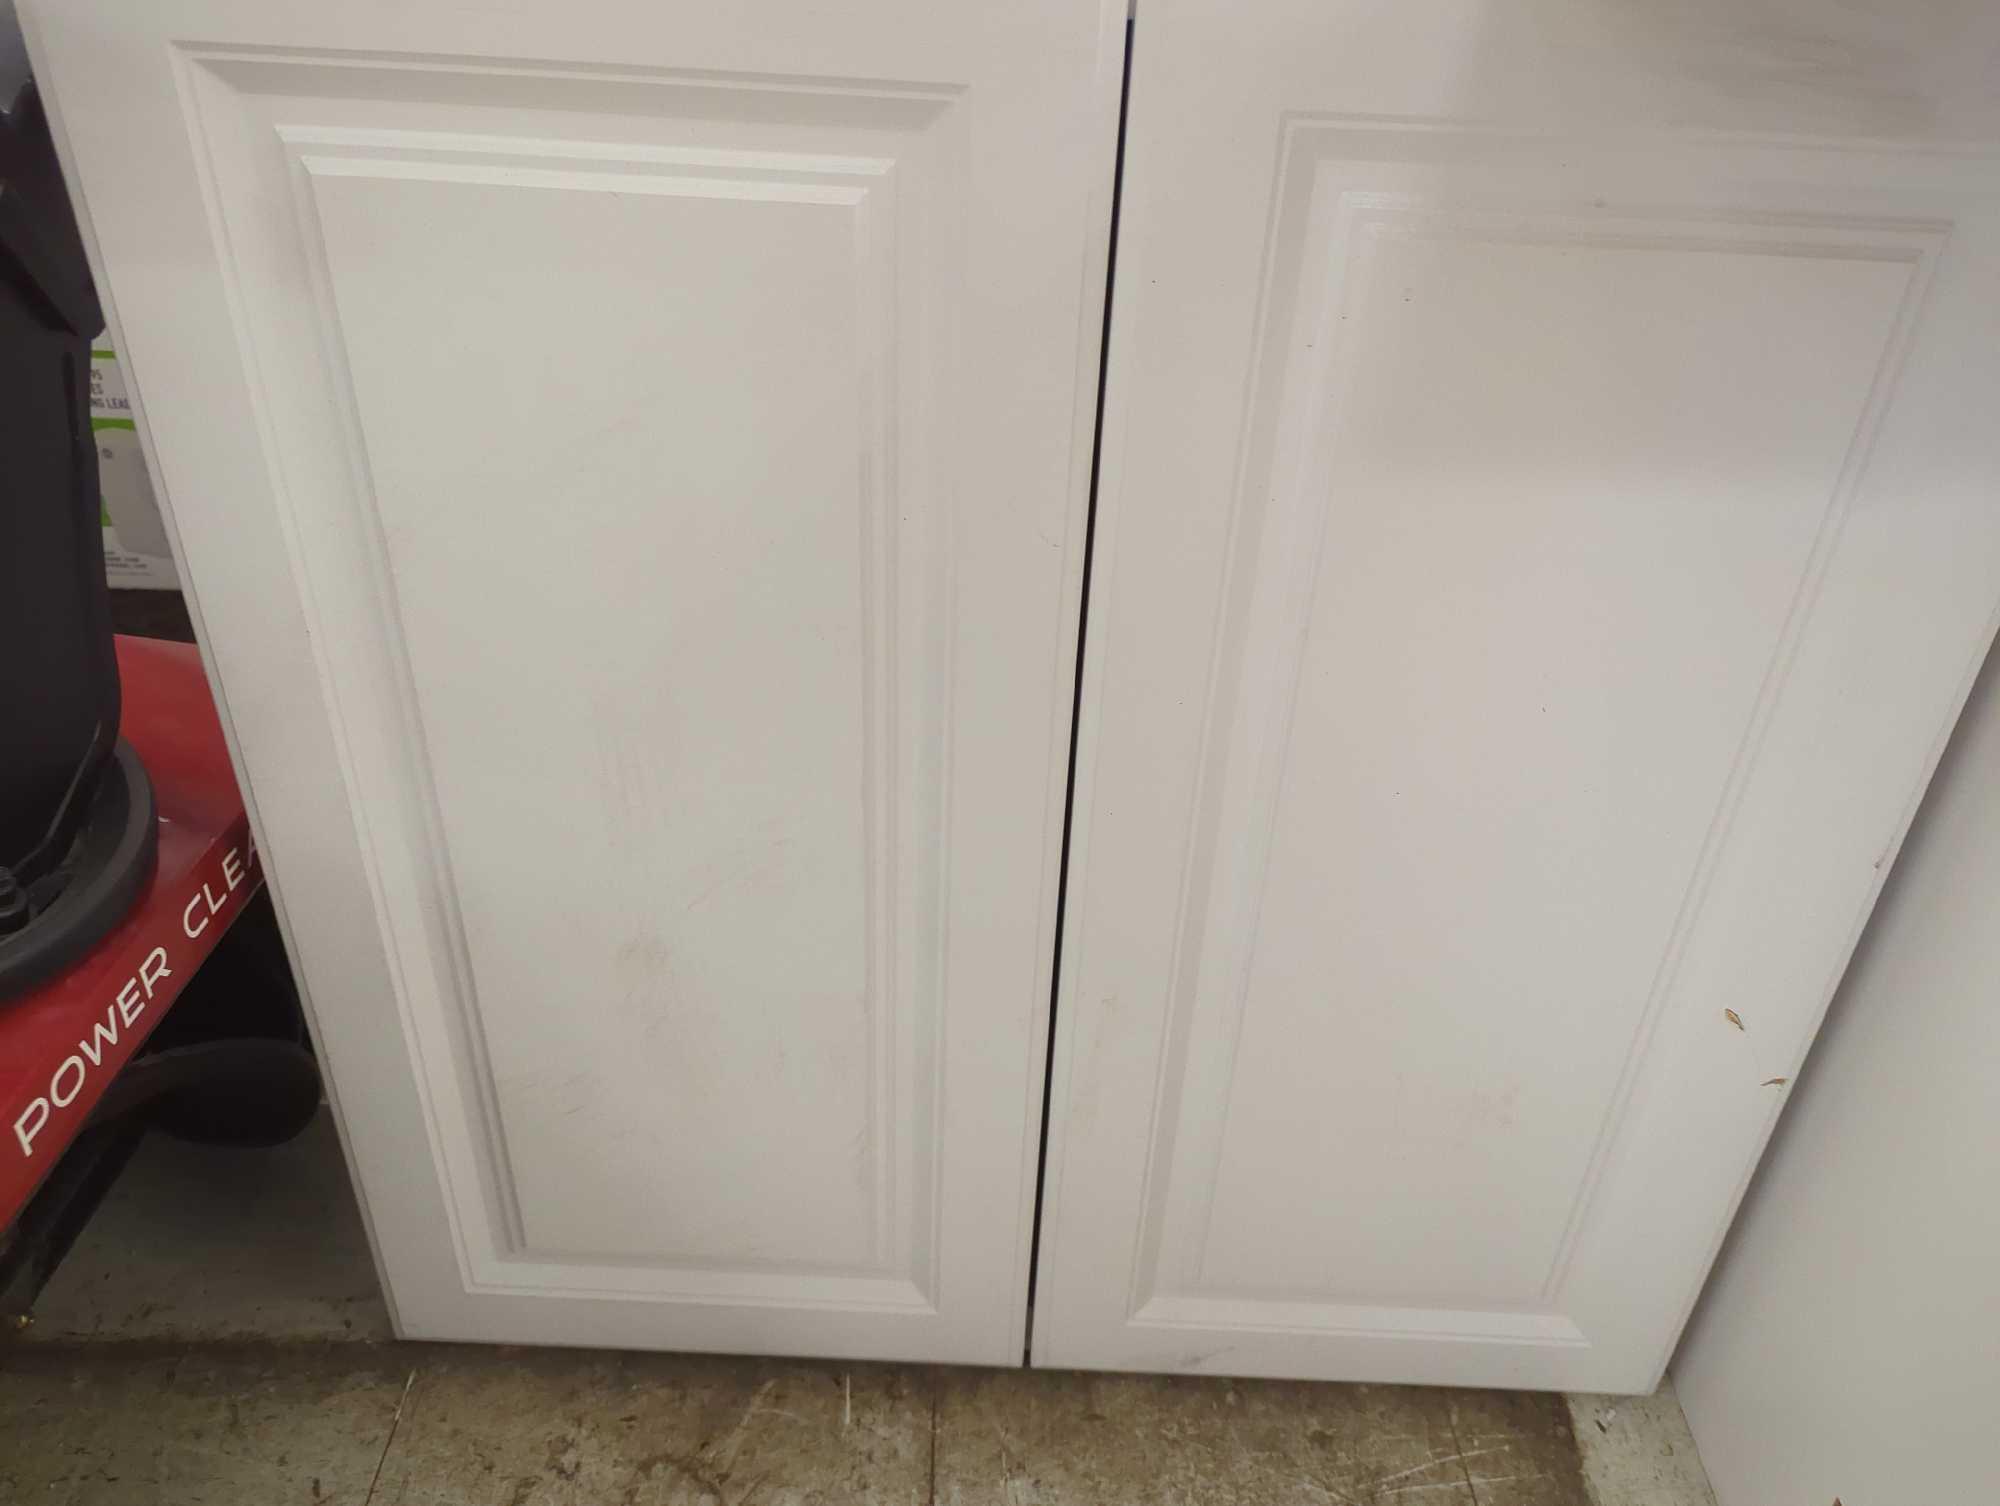 White Painted Plywood Shaker Assembled Wall Kitchen Cabinet. Comes as is shown. Appears to be